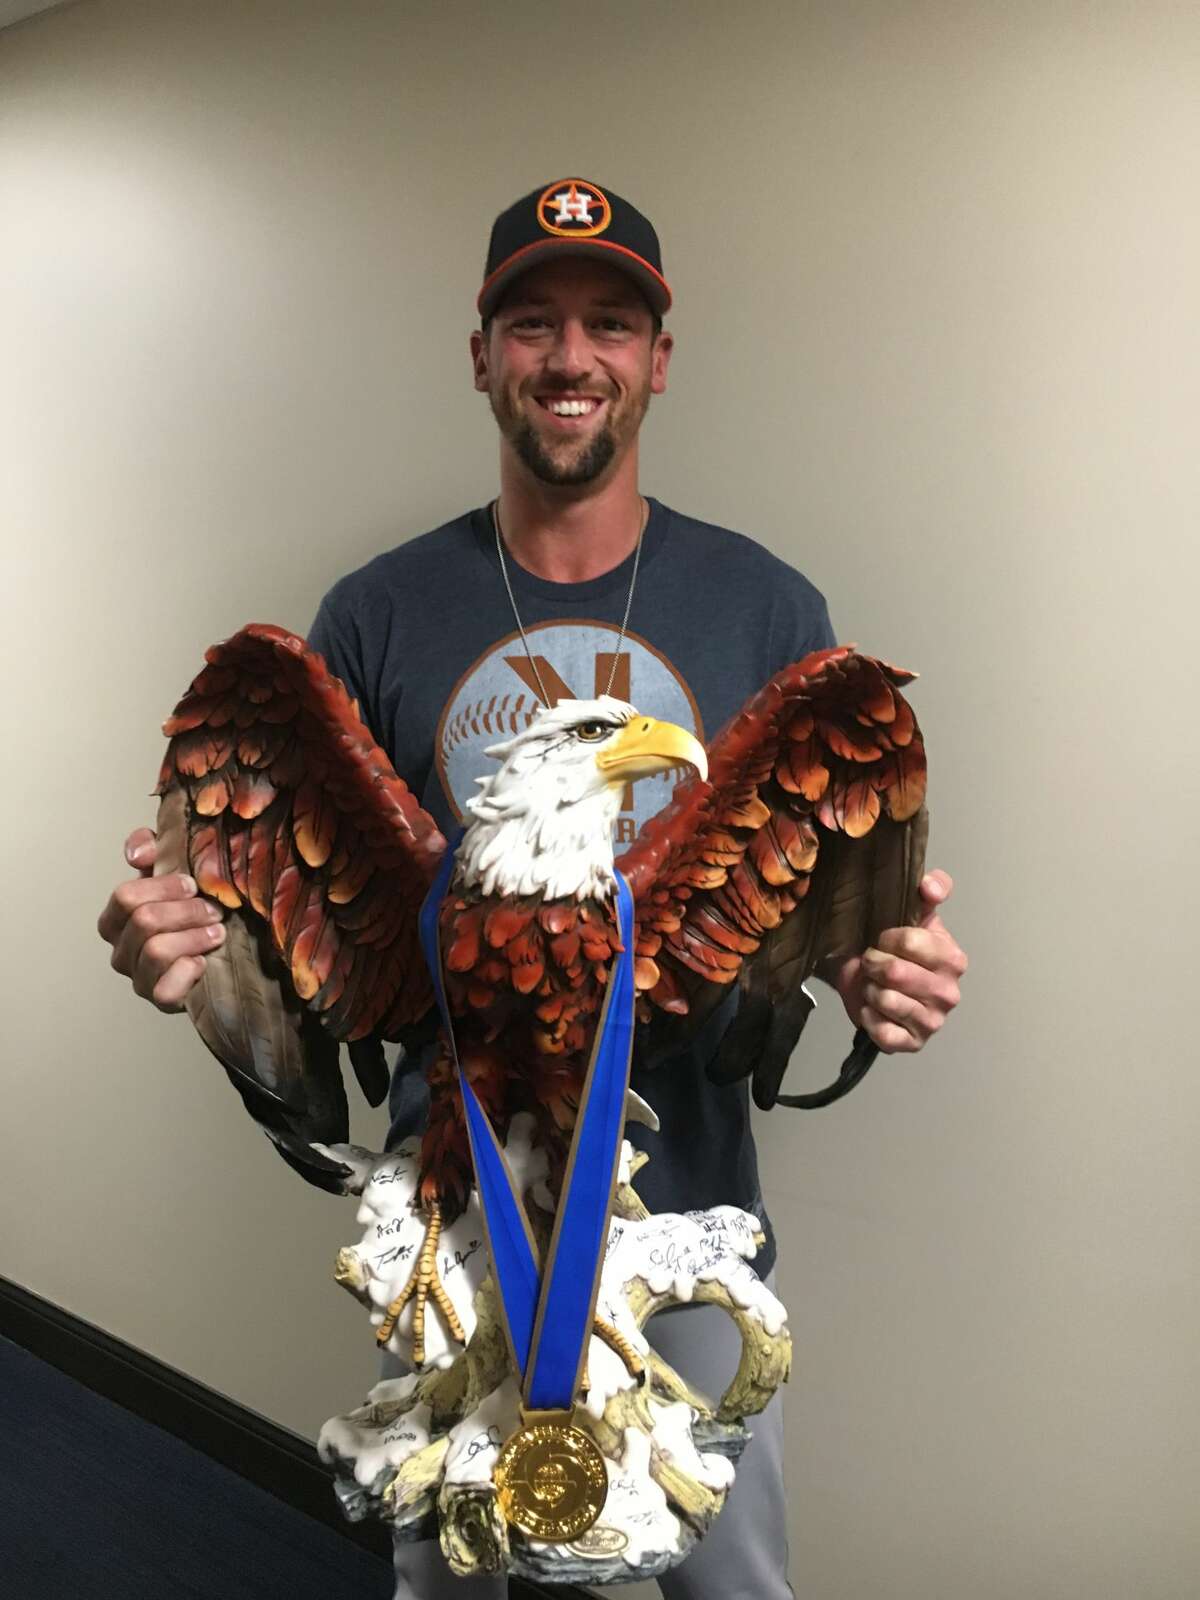 Astros reliever Luke Gregerson poses with the eagle and gold medal Friday morning outside the Astros' spring training clubhouse in West Palm Beach, Fla.